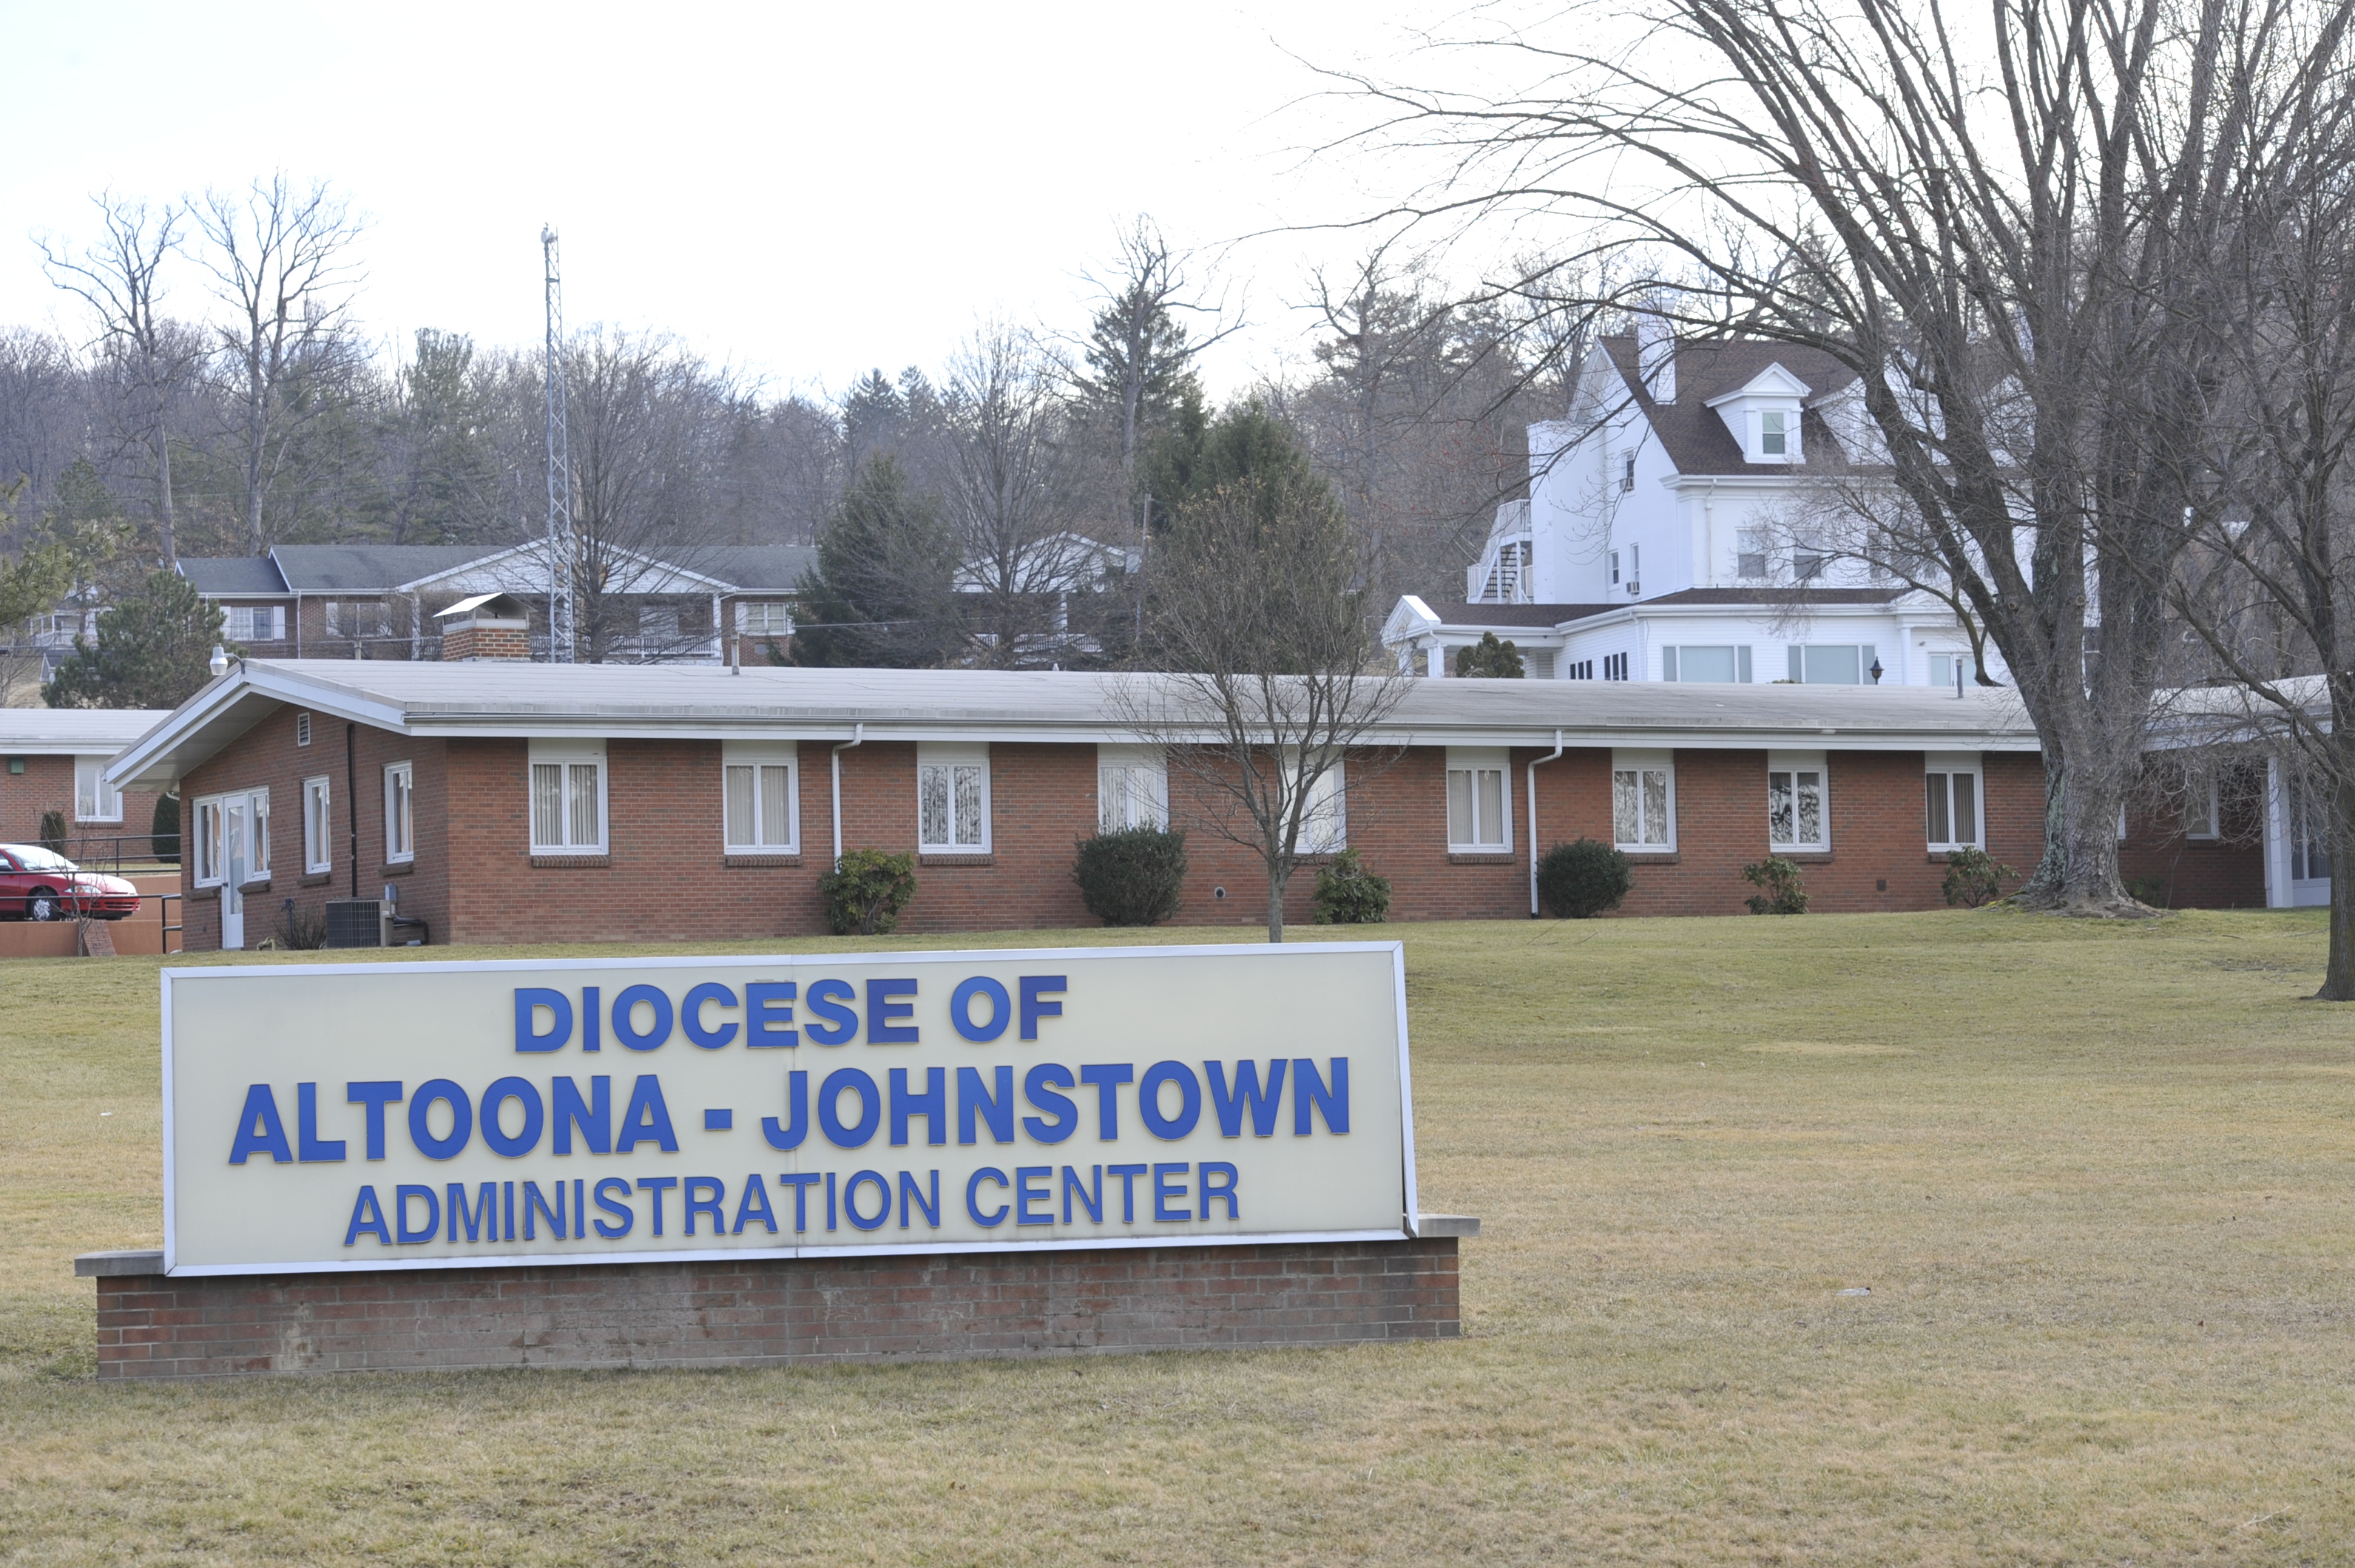 The Altoona-Johnstown diocese administration building is shown in Altoona, Pa., March 1, 2016 (Todd Berkey—AP)